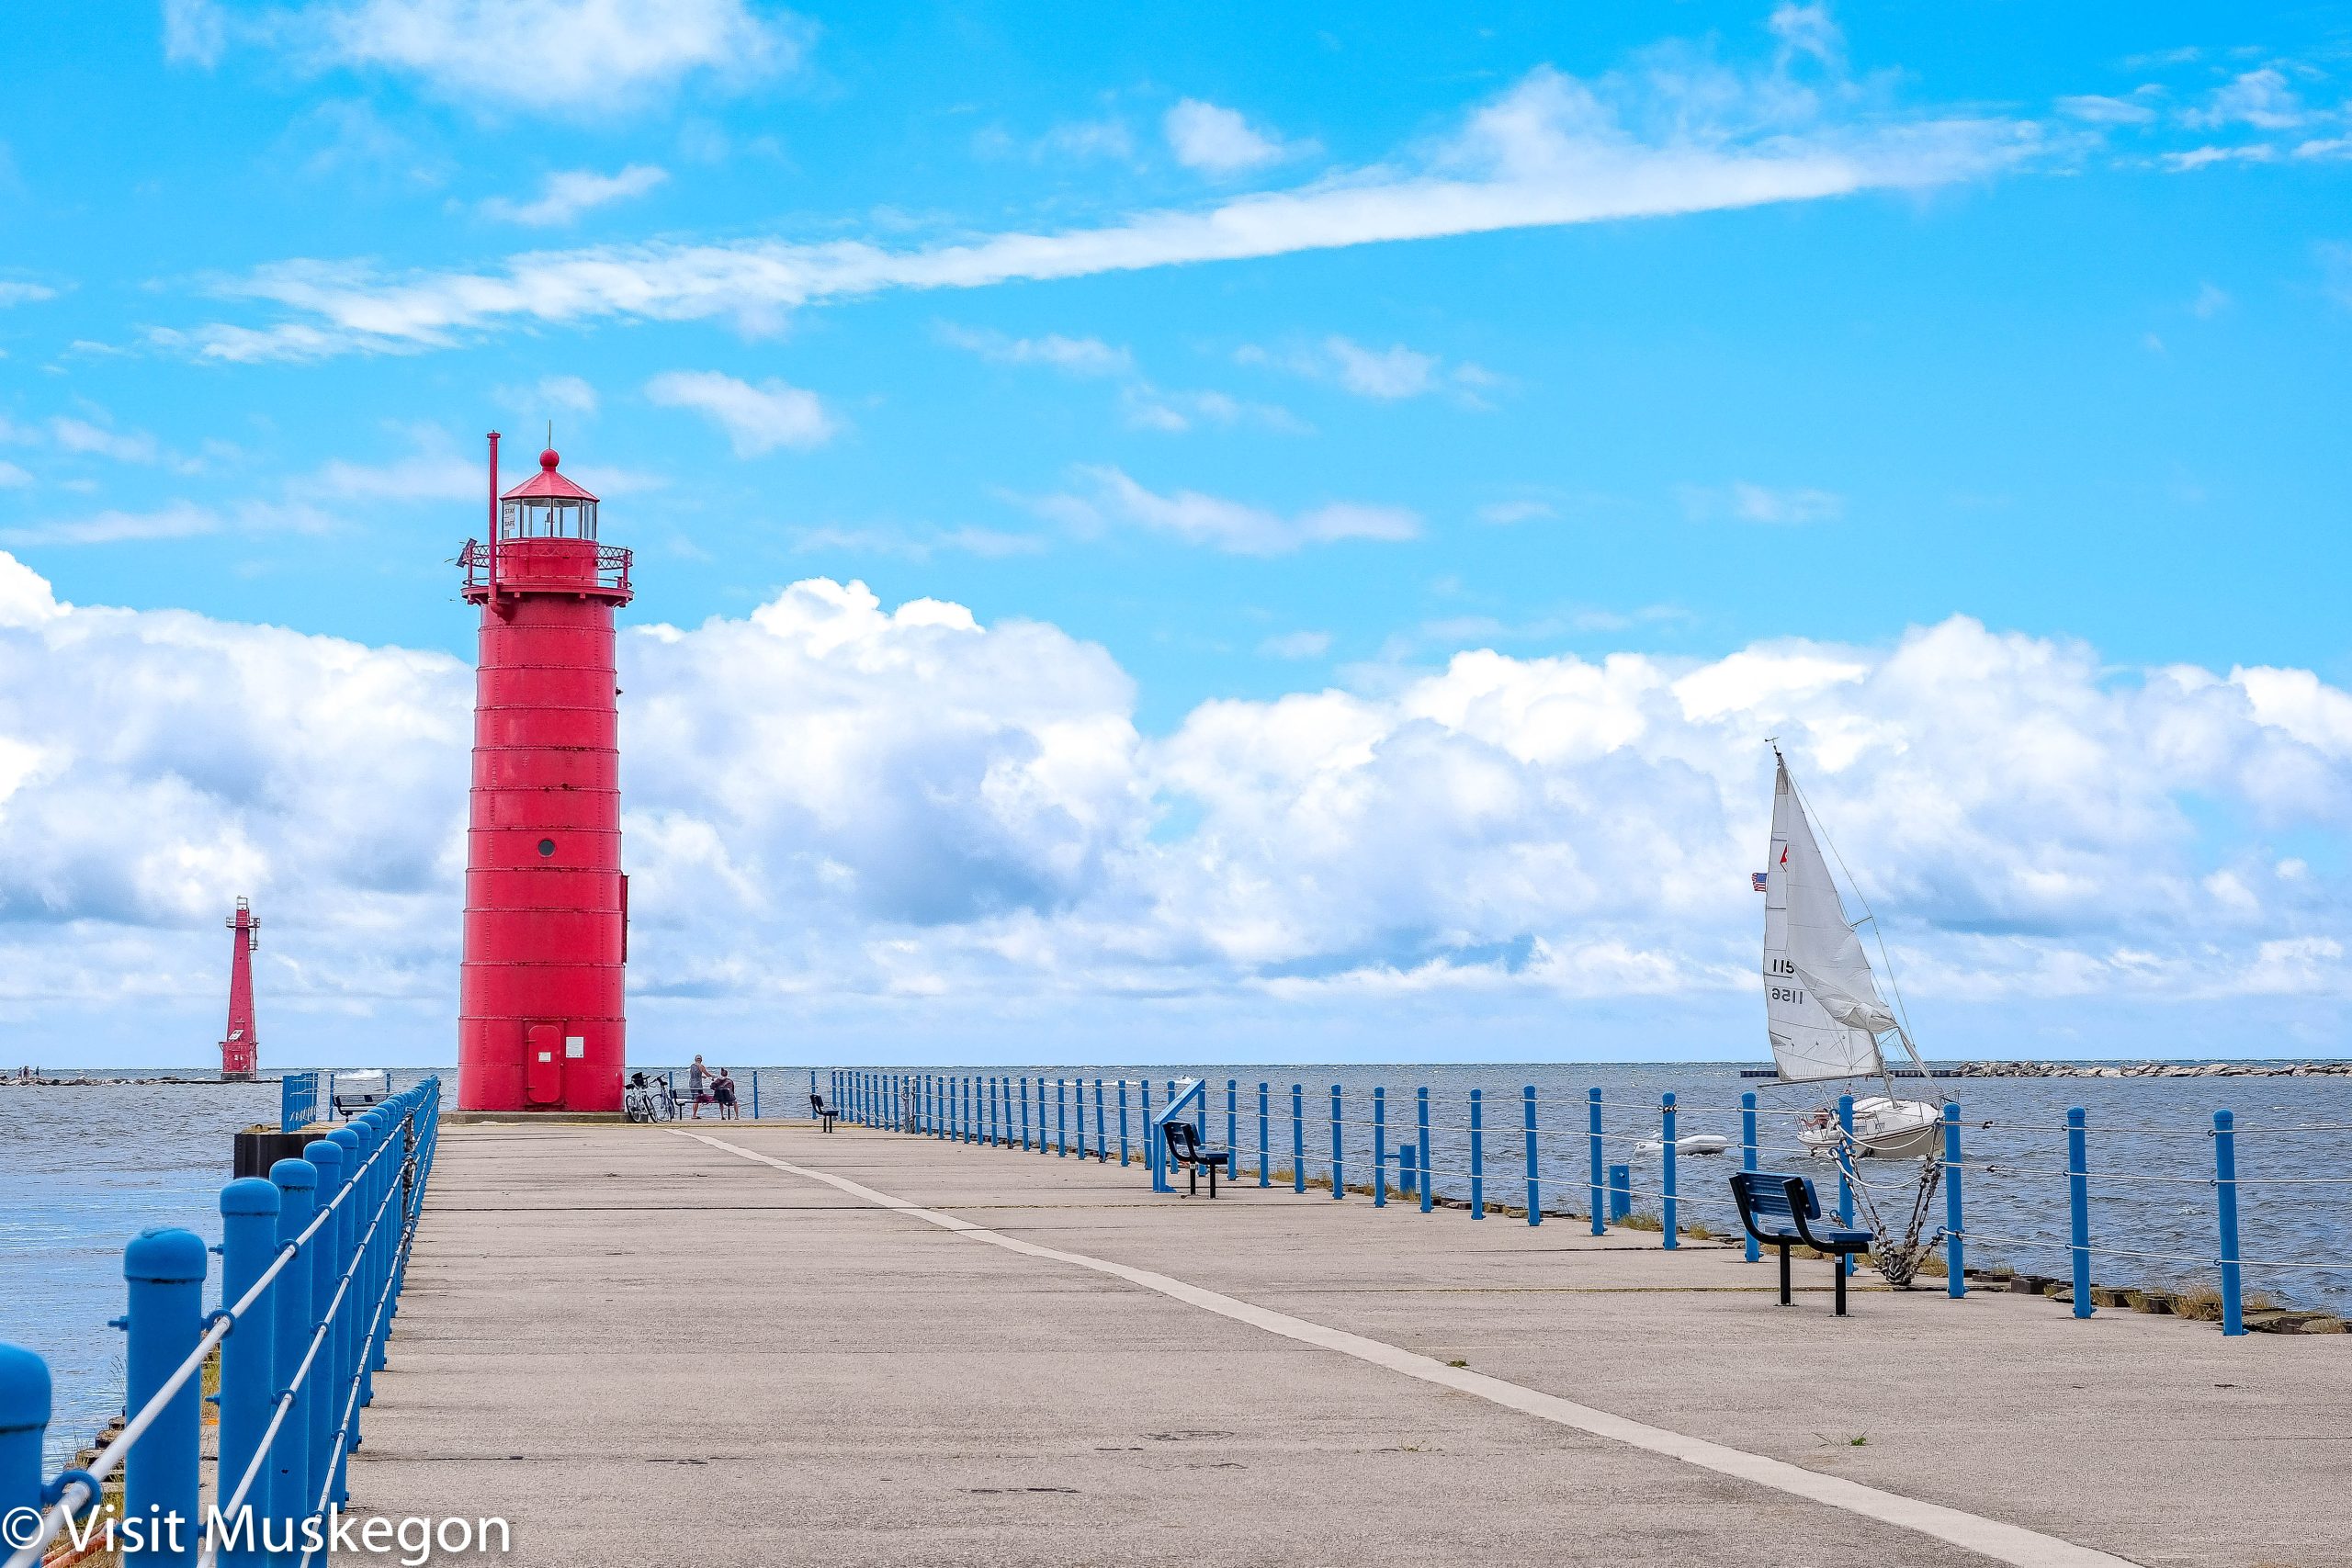 Two red light towers stand in front of blue sky filled with cumulus clouds. a sailboat with white sails is seen to the right of pier that leads to one of the lighttowers.